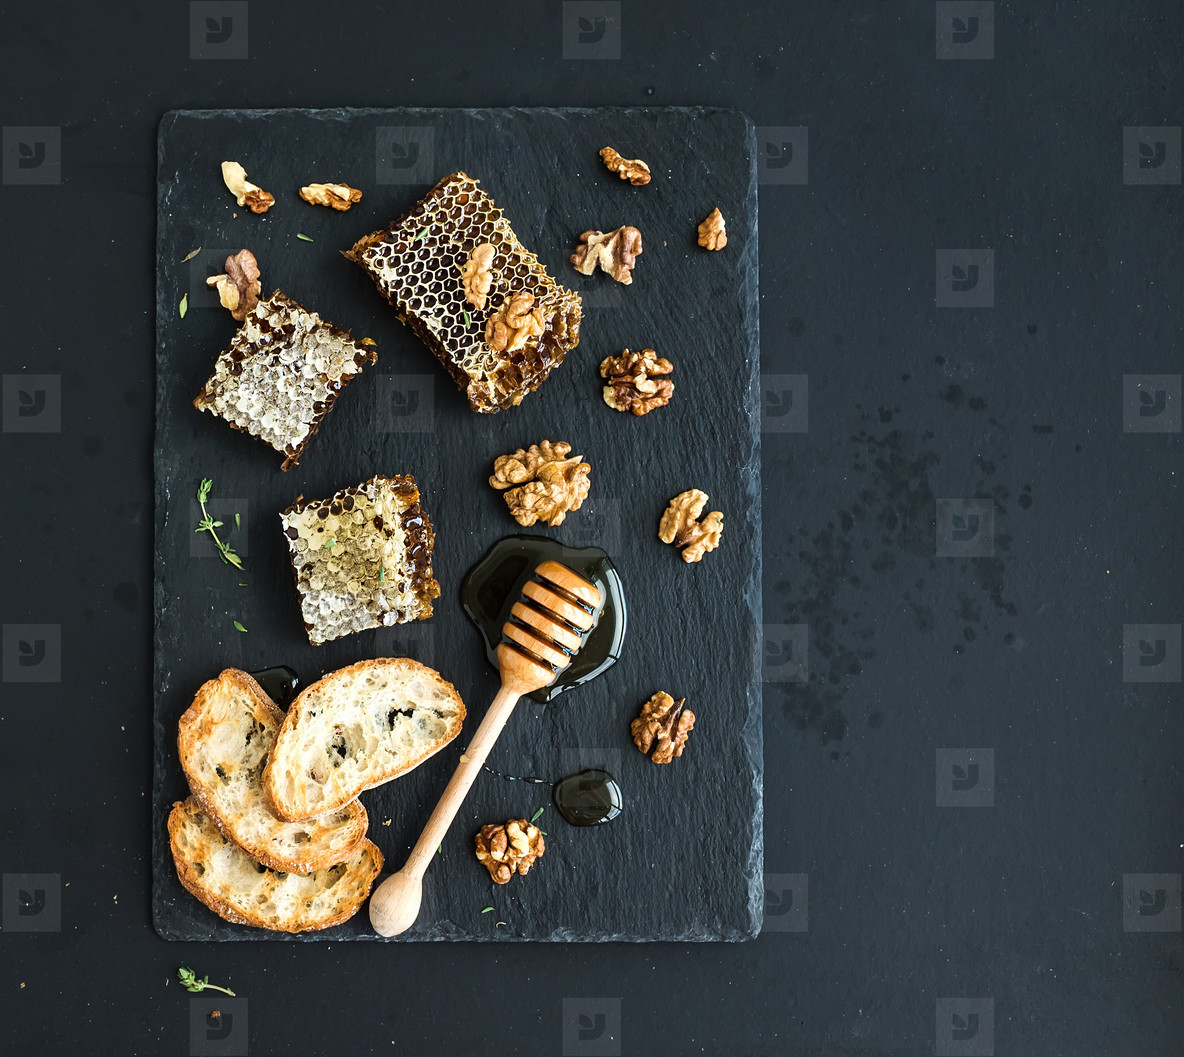 Honeycomb  walnuts  bread slices and honey dipper on black slate tray over grunge dark backdrop  top view